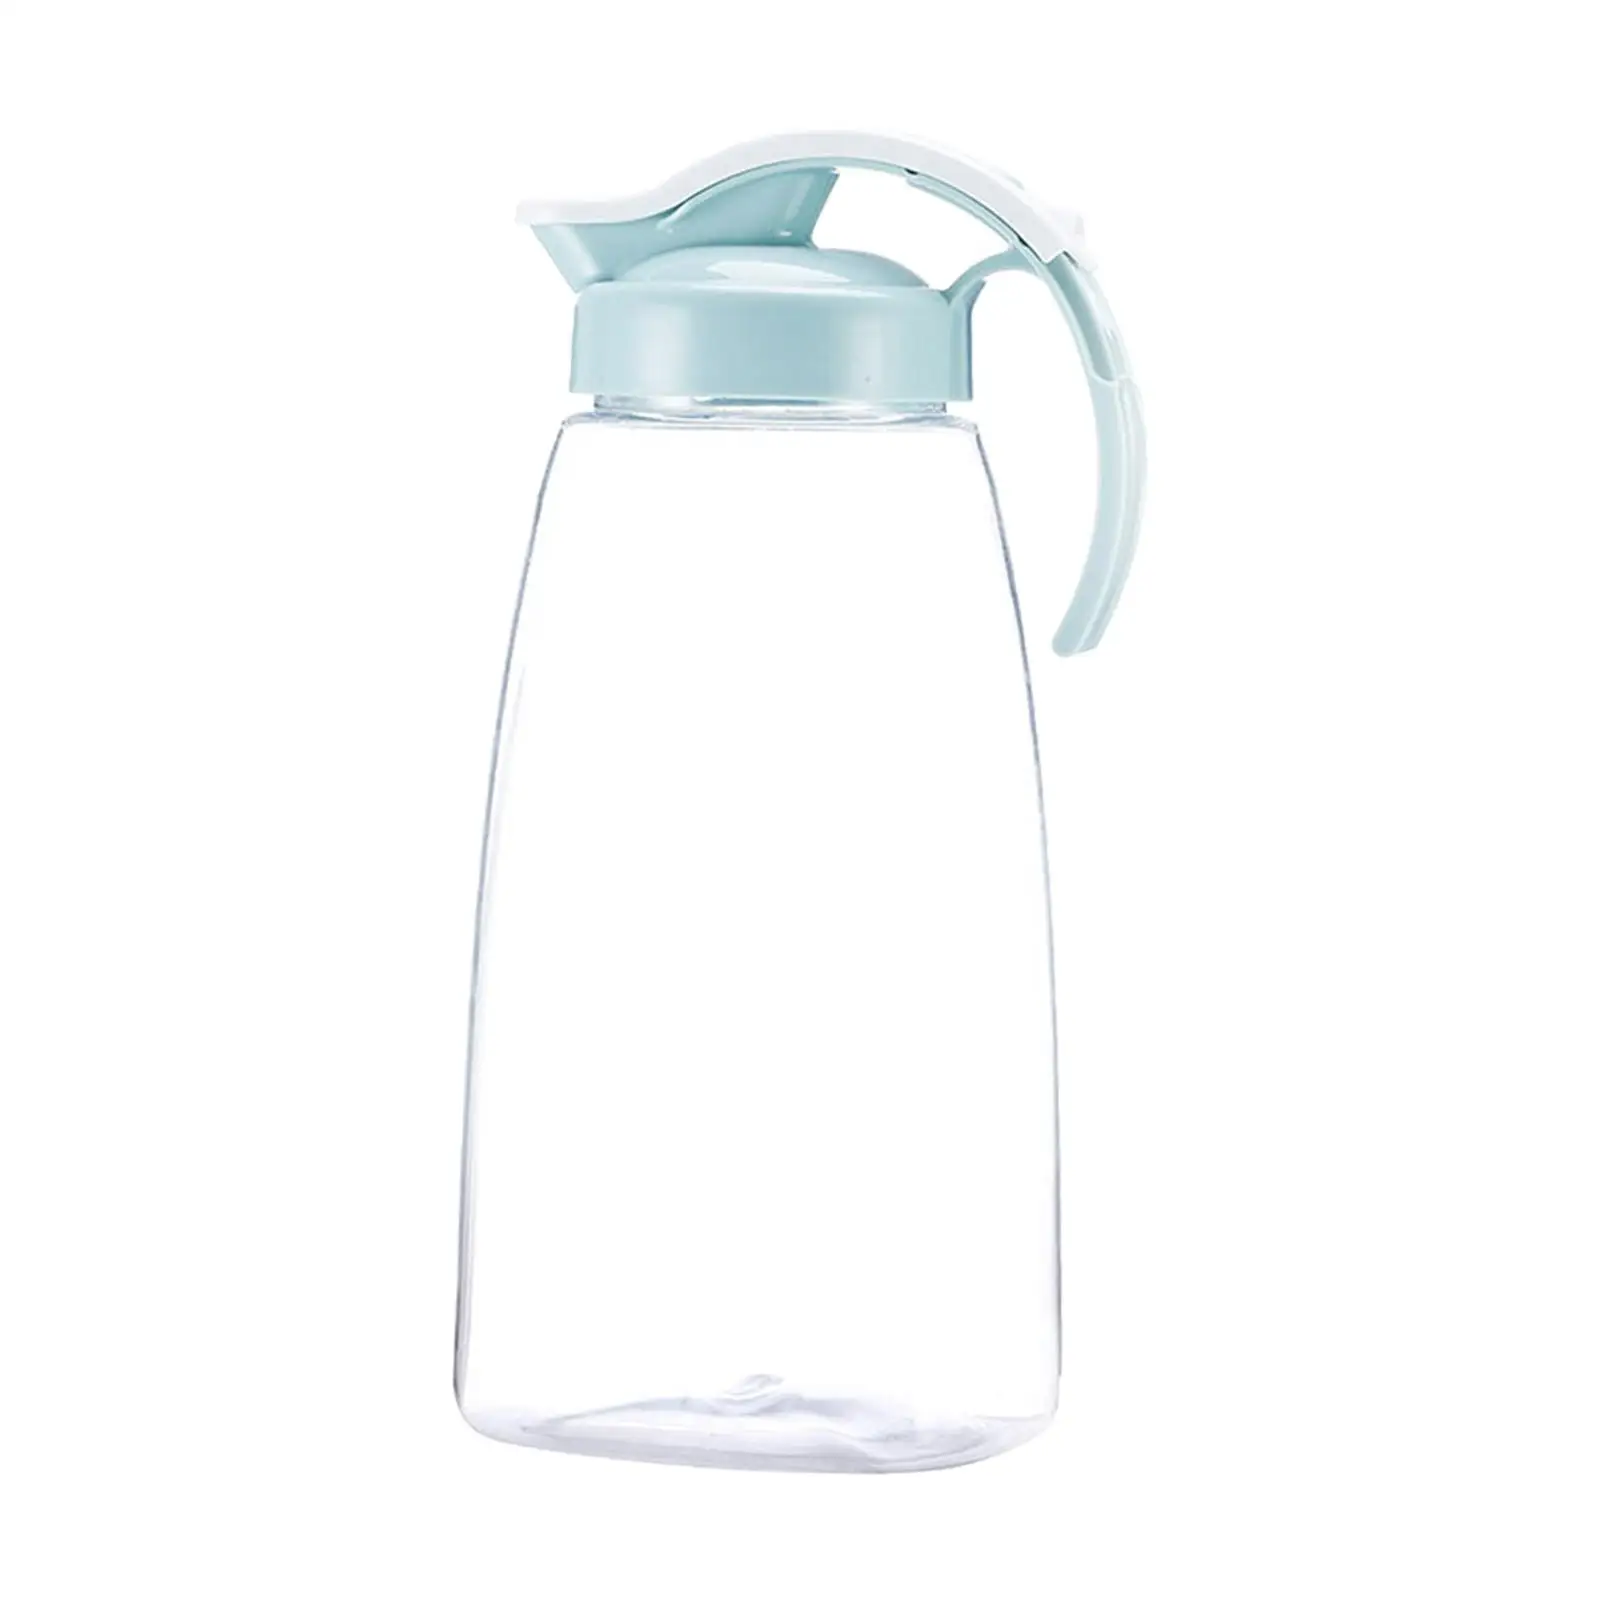 Fruit Juice Jug Water Pitcher Cold Kettle Drinks Water Jug for Party Refrigerator